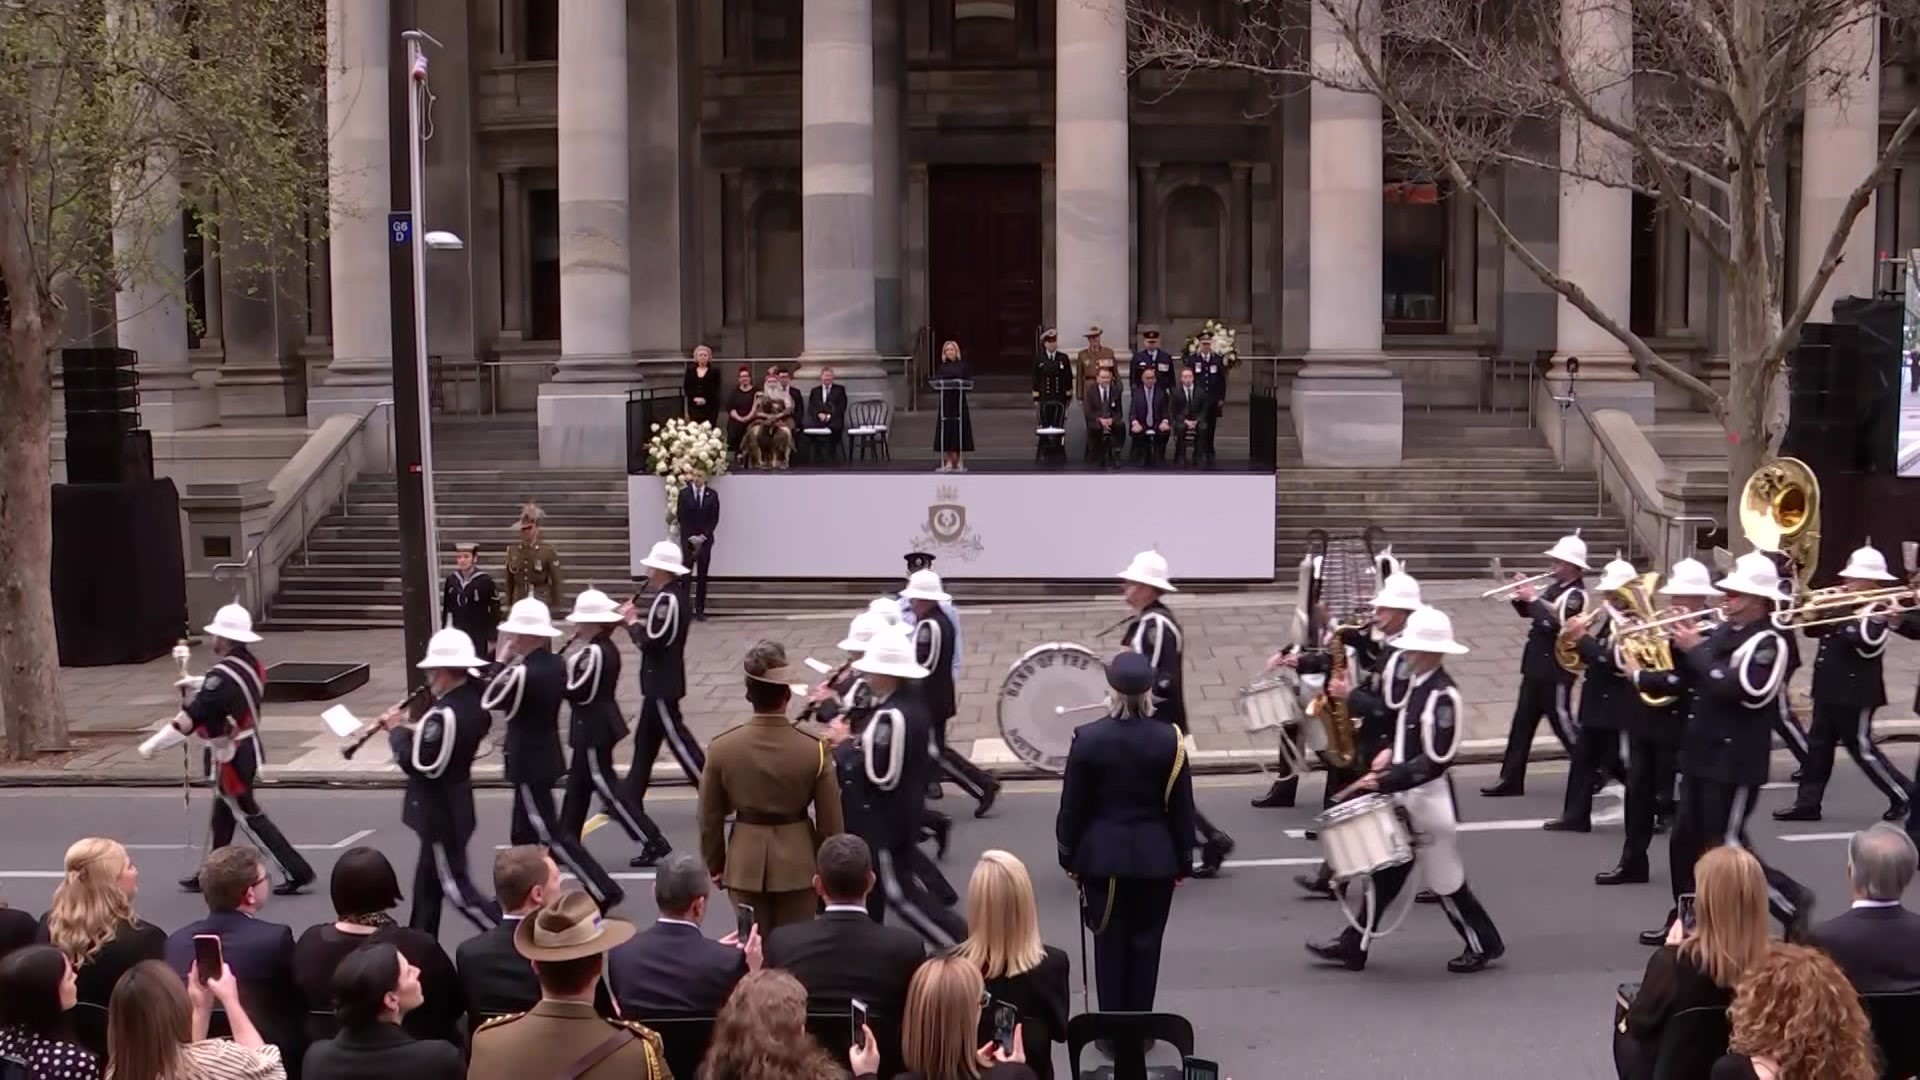 A marching band in the streets of Adelaide